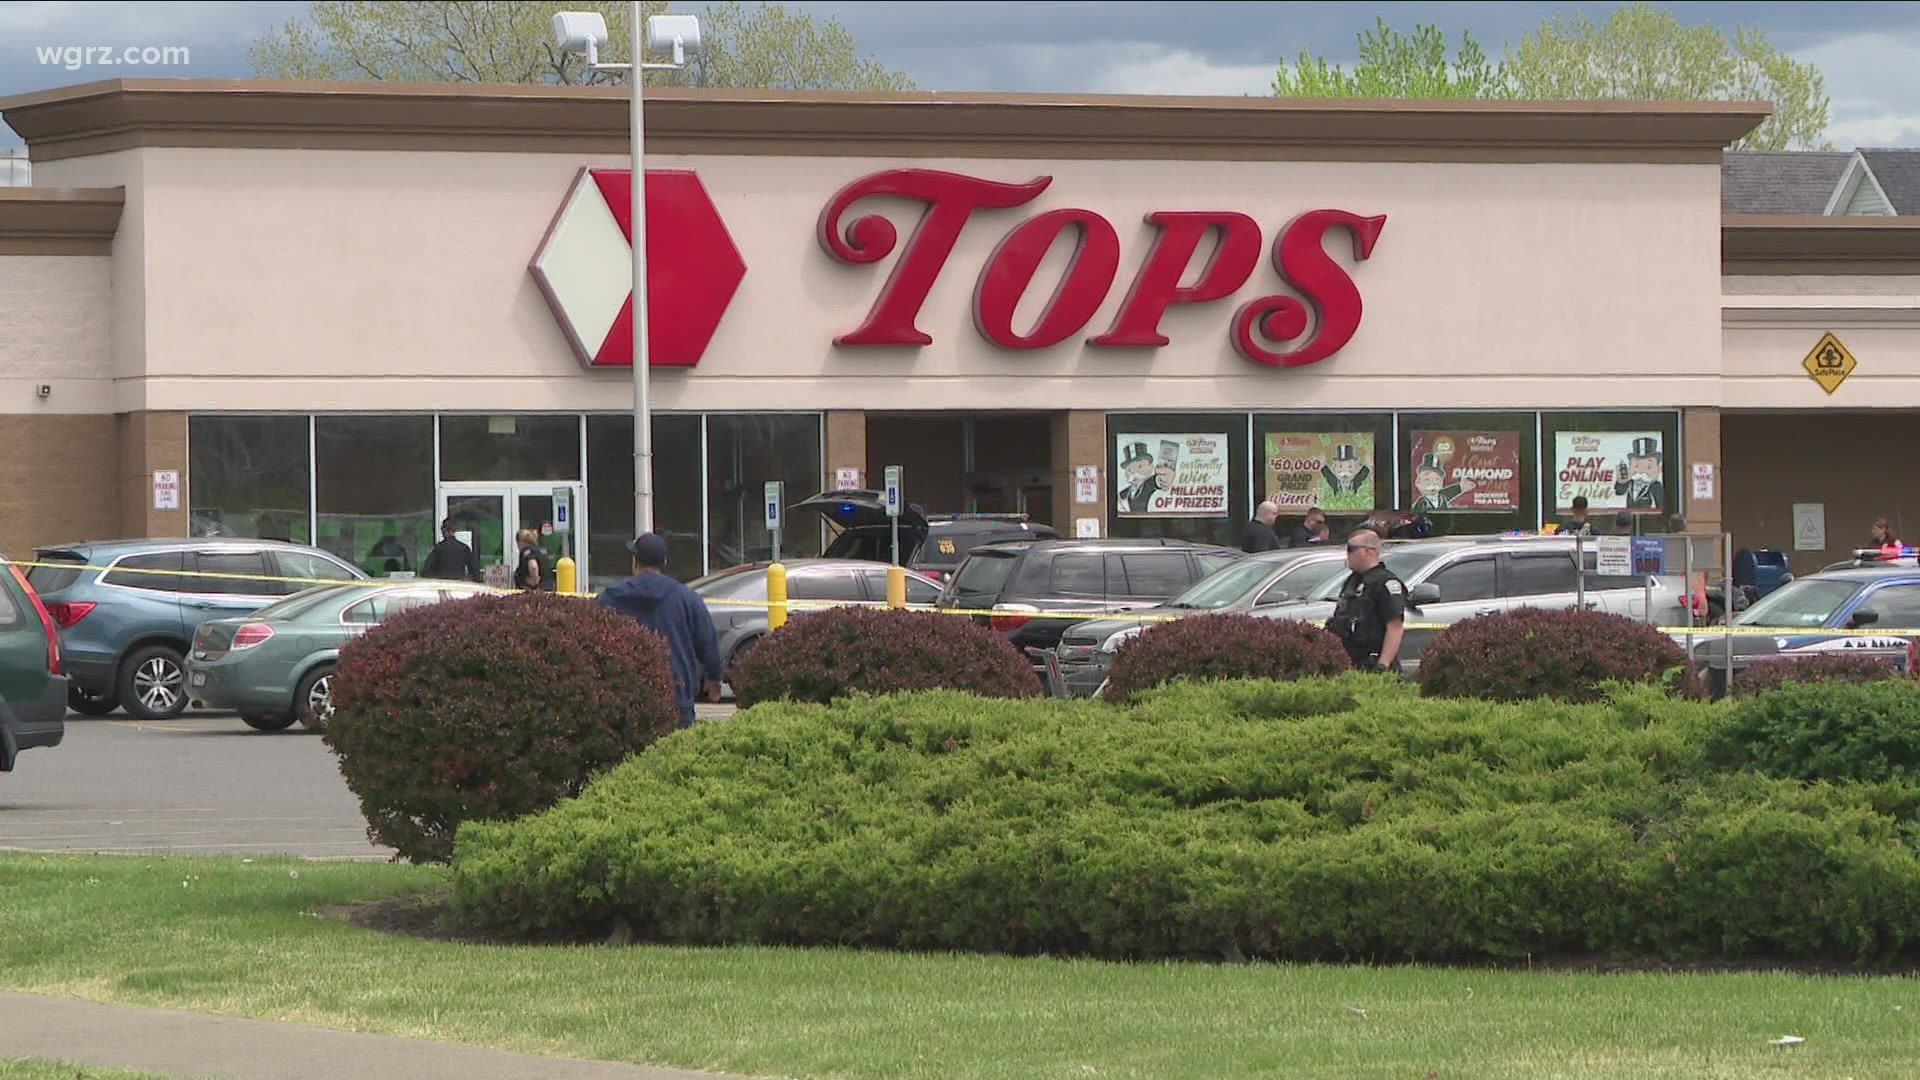 Since the mass shooting on May 14th, there has been a lot of community feedback on whether or not the Tops on Jefferson Avenue should re-open.